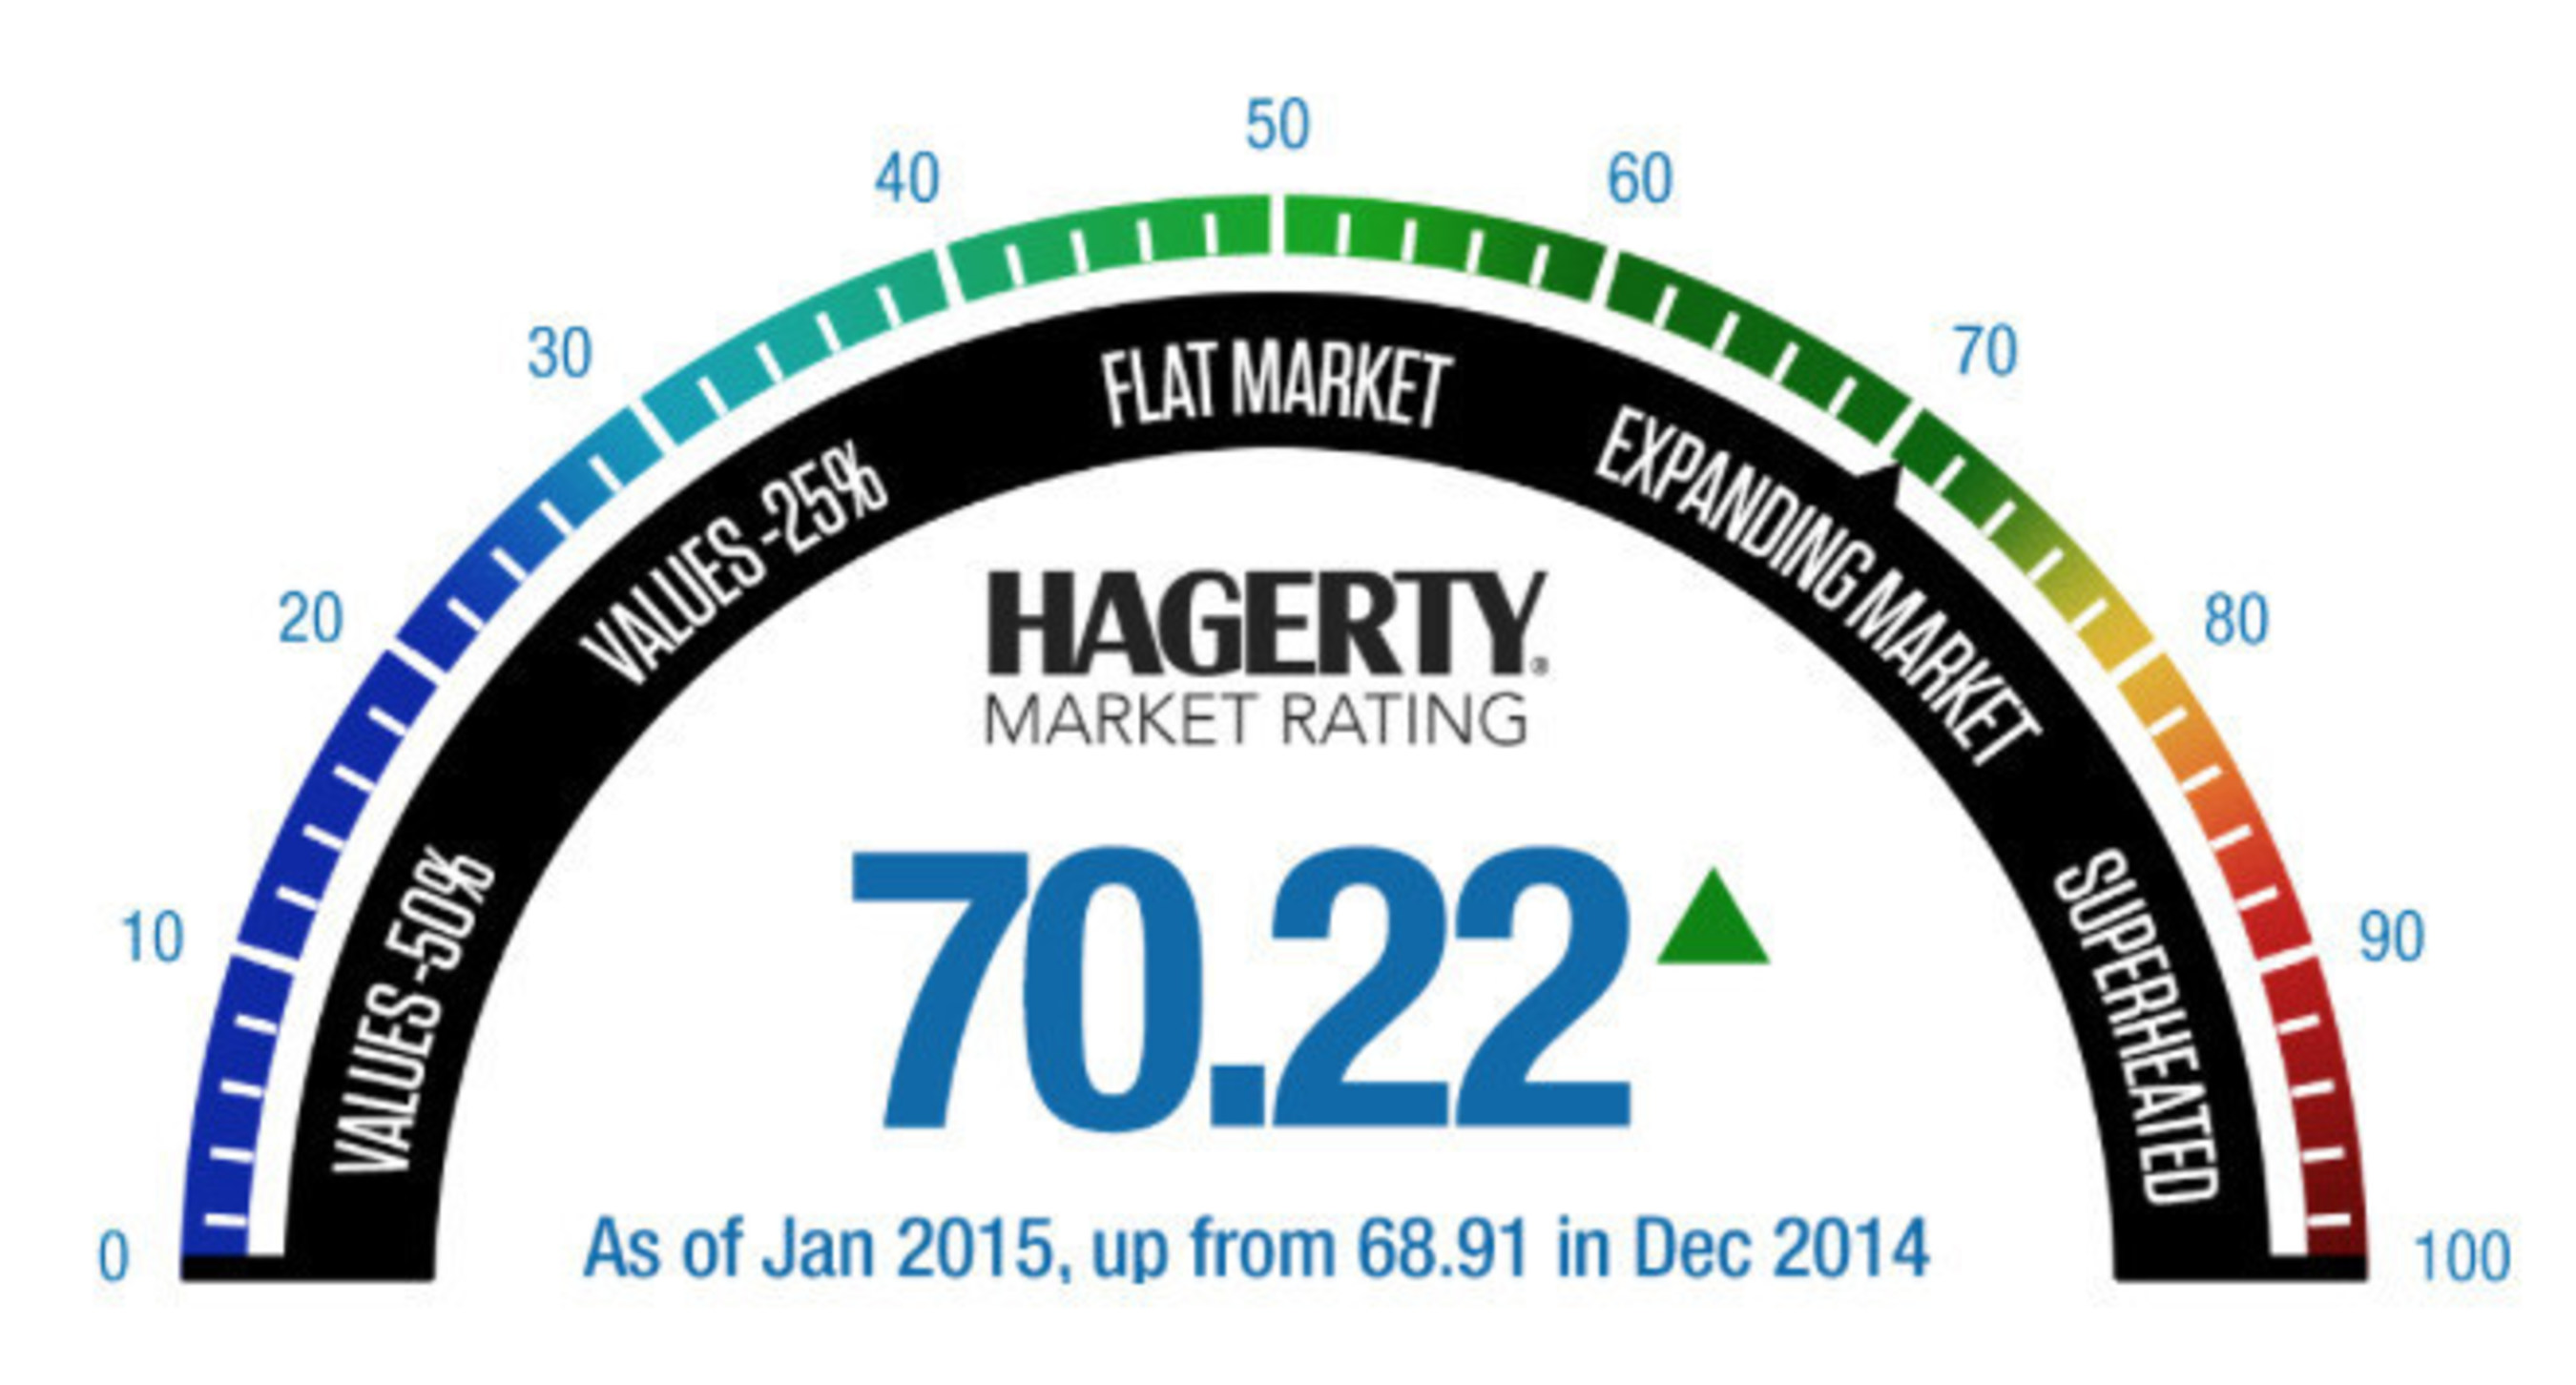 Hagerty Market Rating as of January 2015, up from 68.91 in December 2014. The Hagerty Market Rating is a new tool to gauge the status of the classic car market.